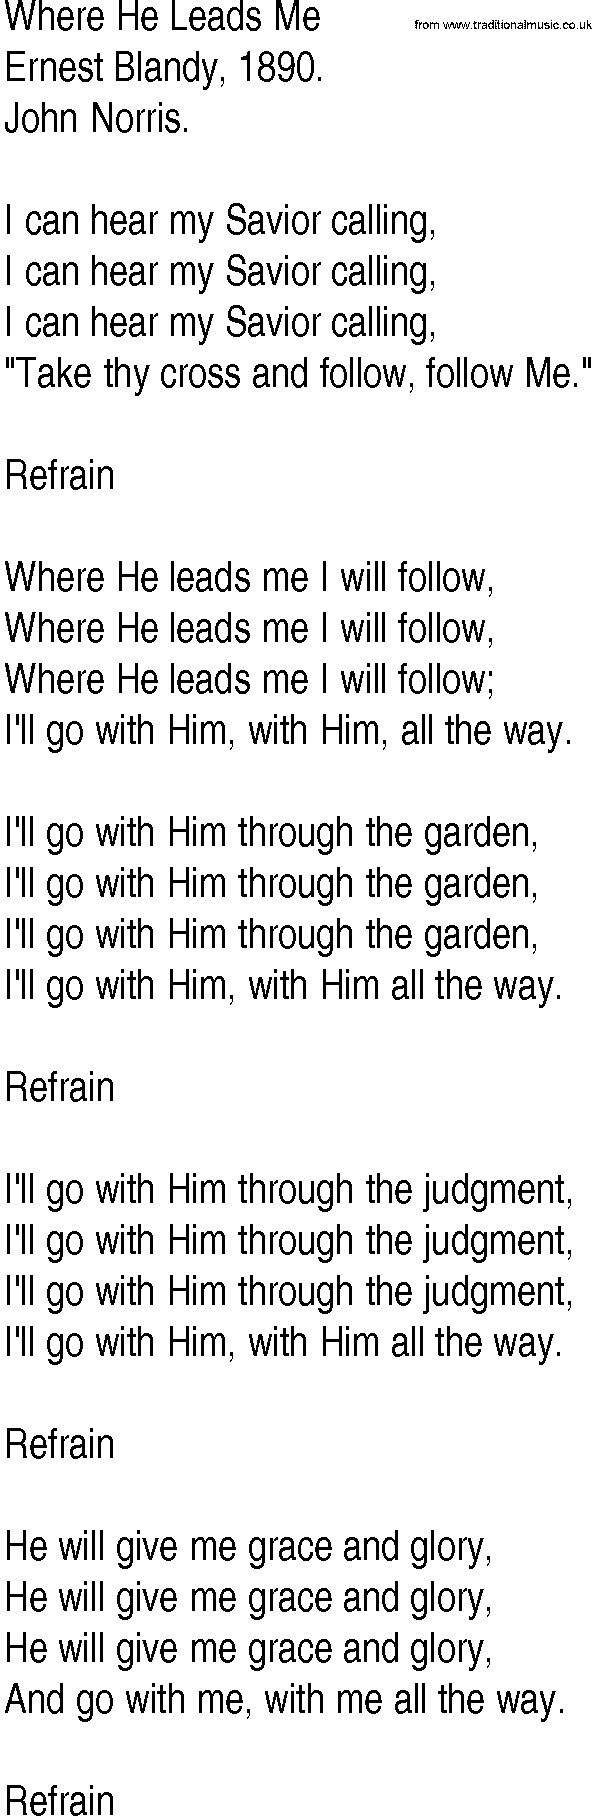 Hymn and Gospel Song: Where He Leads Me by Ernest Blandy lyrics